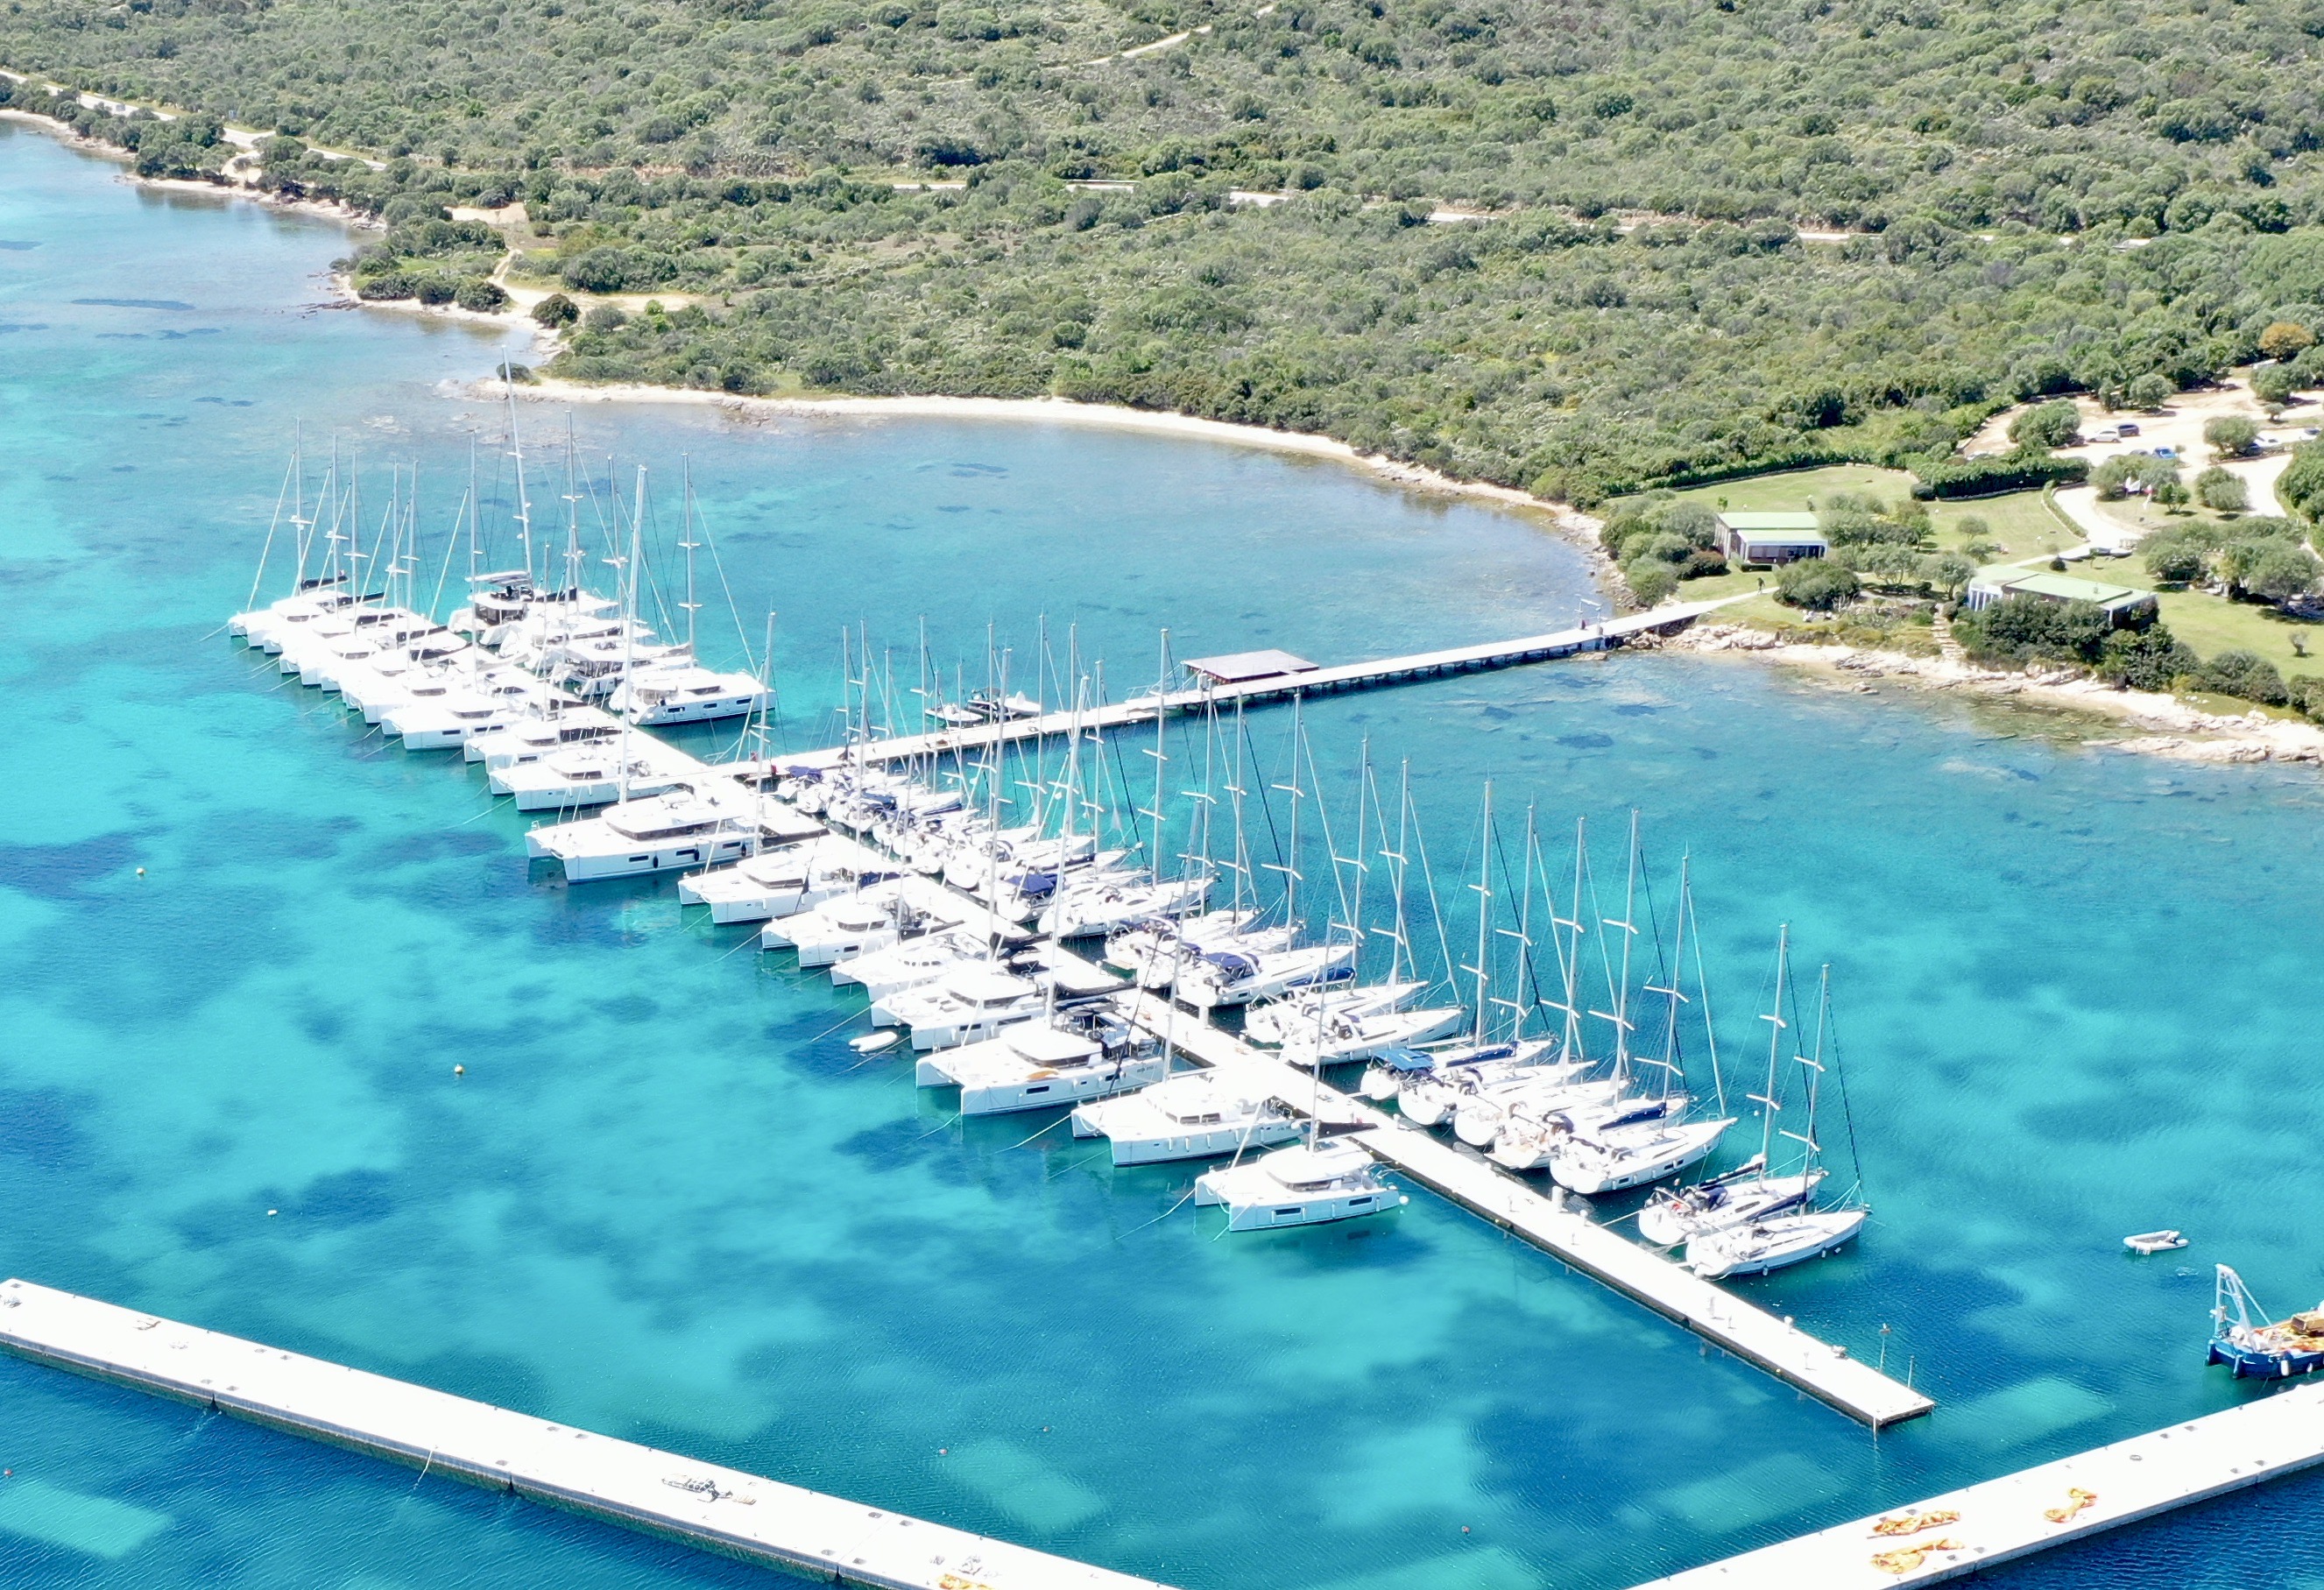 Dream Yachting is the only dealer in Italy with almost the entire Lagoon and Beneteau range available for on-board visits